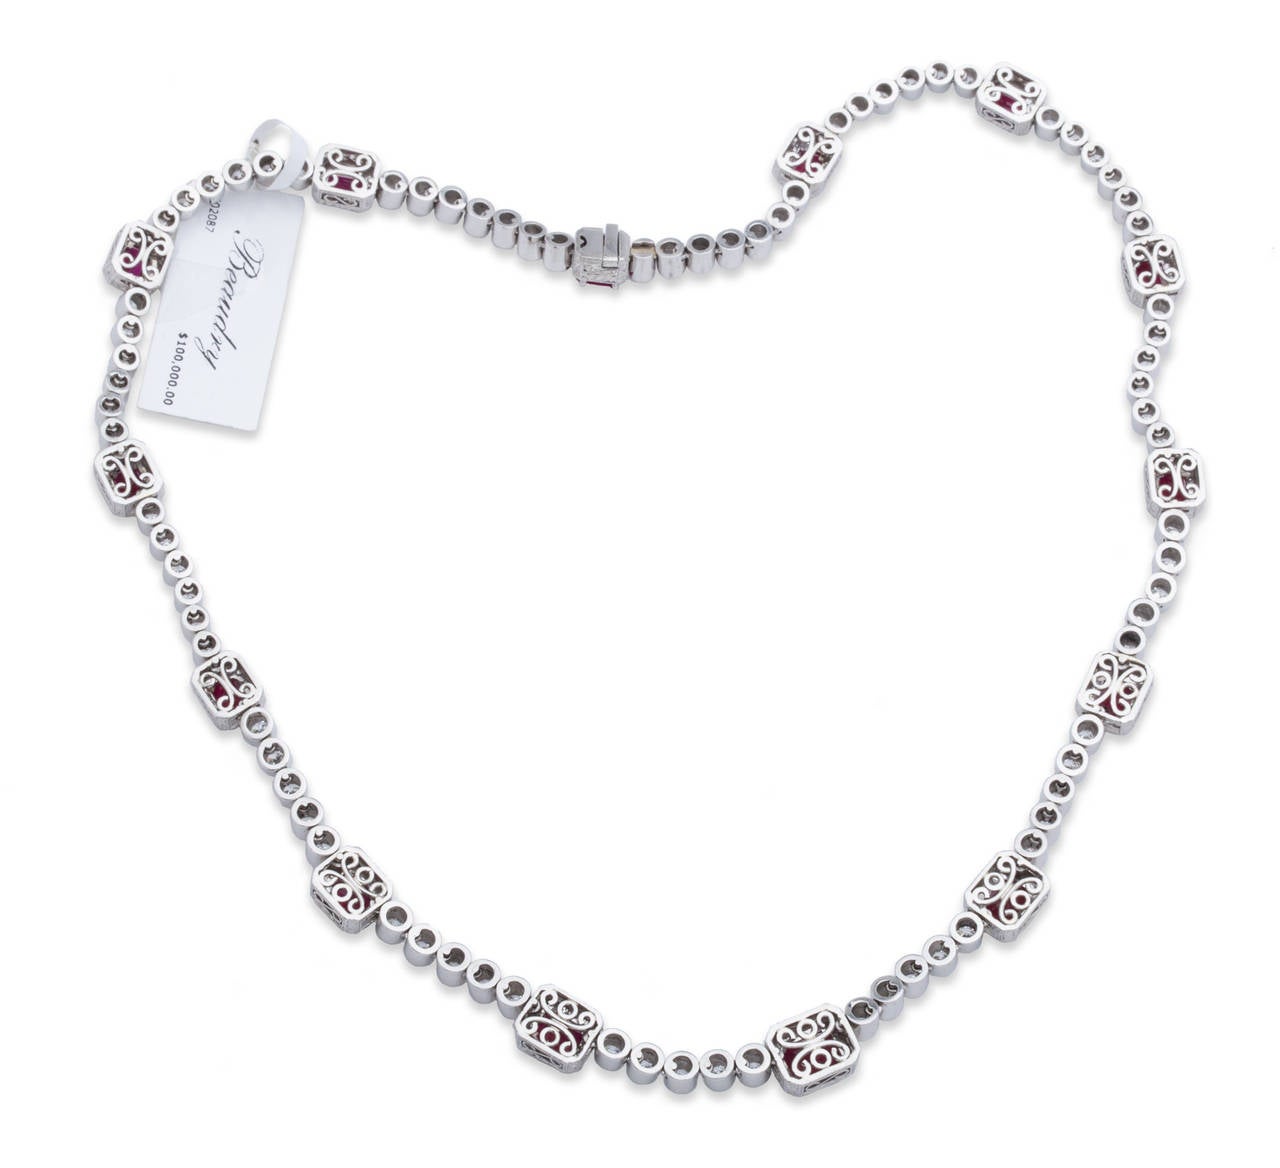 Beaudry Beverly Hills, Diamond and Ruby Necklace in Platinum. Total Diamond Weight 5.99ct, Total Ruby Weight 10.11ct, Necklace Length 16.50